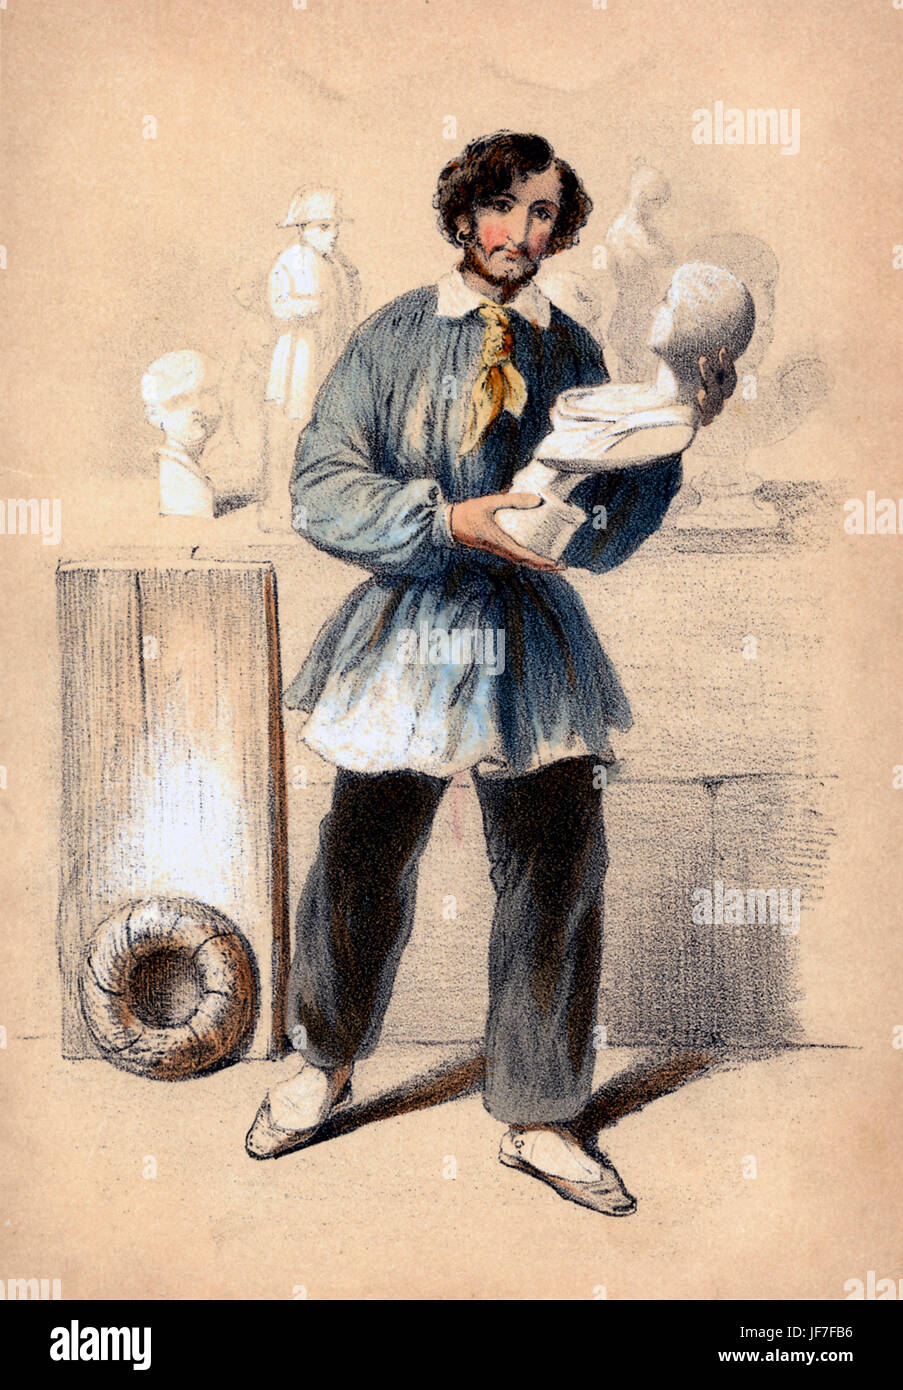 Italien M de Figures: 19th century sculptor specialising in Italian marble figures. From series 'Paris au XIX. Siècle', (hand- coloured lithograph Parisian costume plates, heightened with gum arabic) c.1855-56. Stock Photo